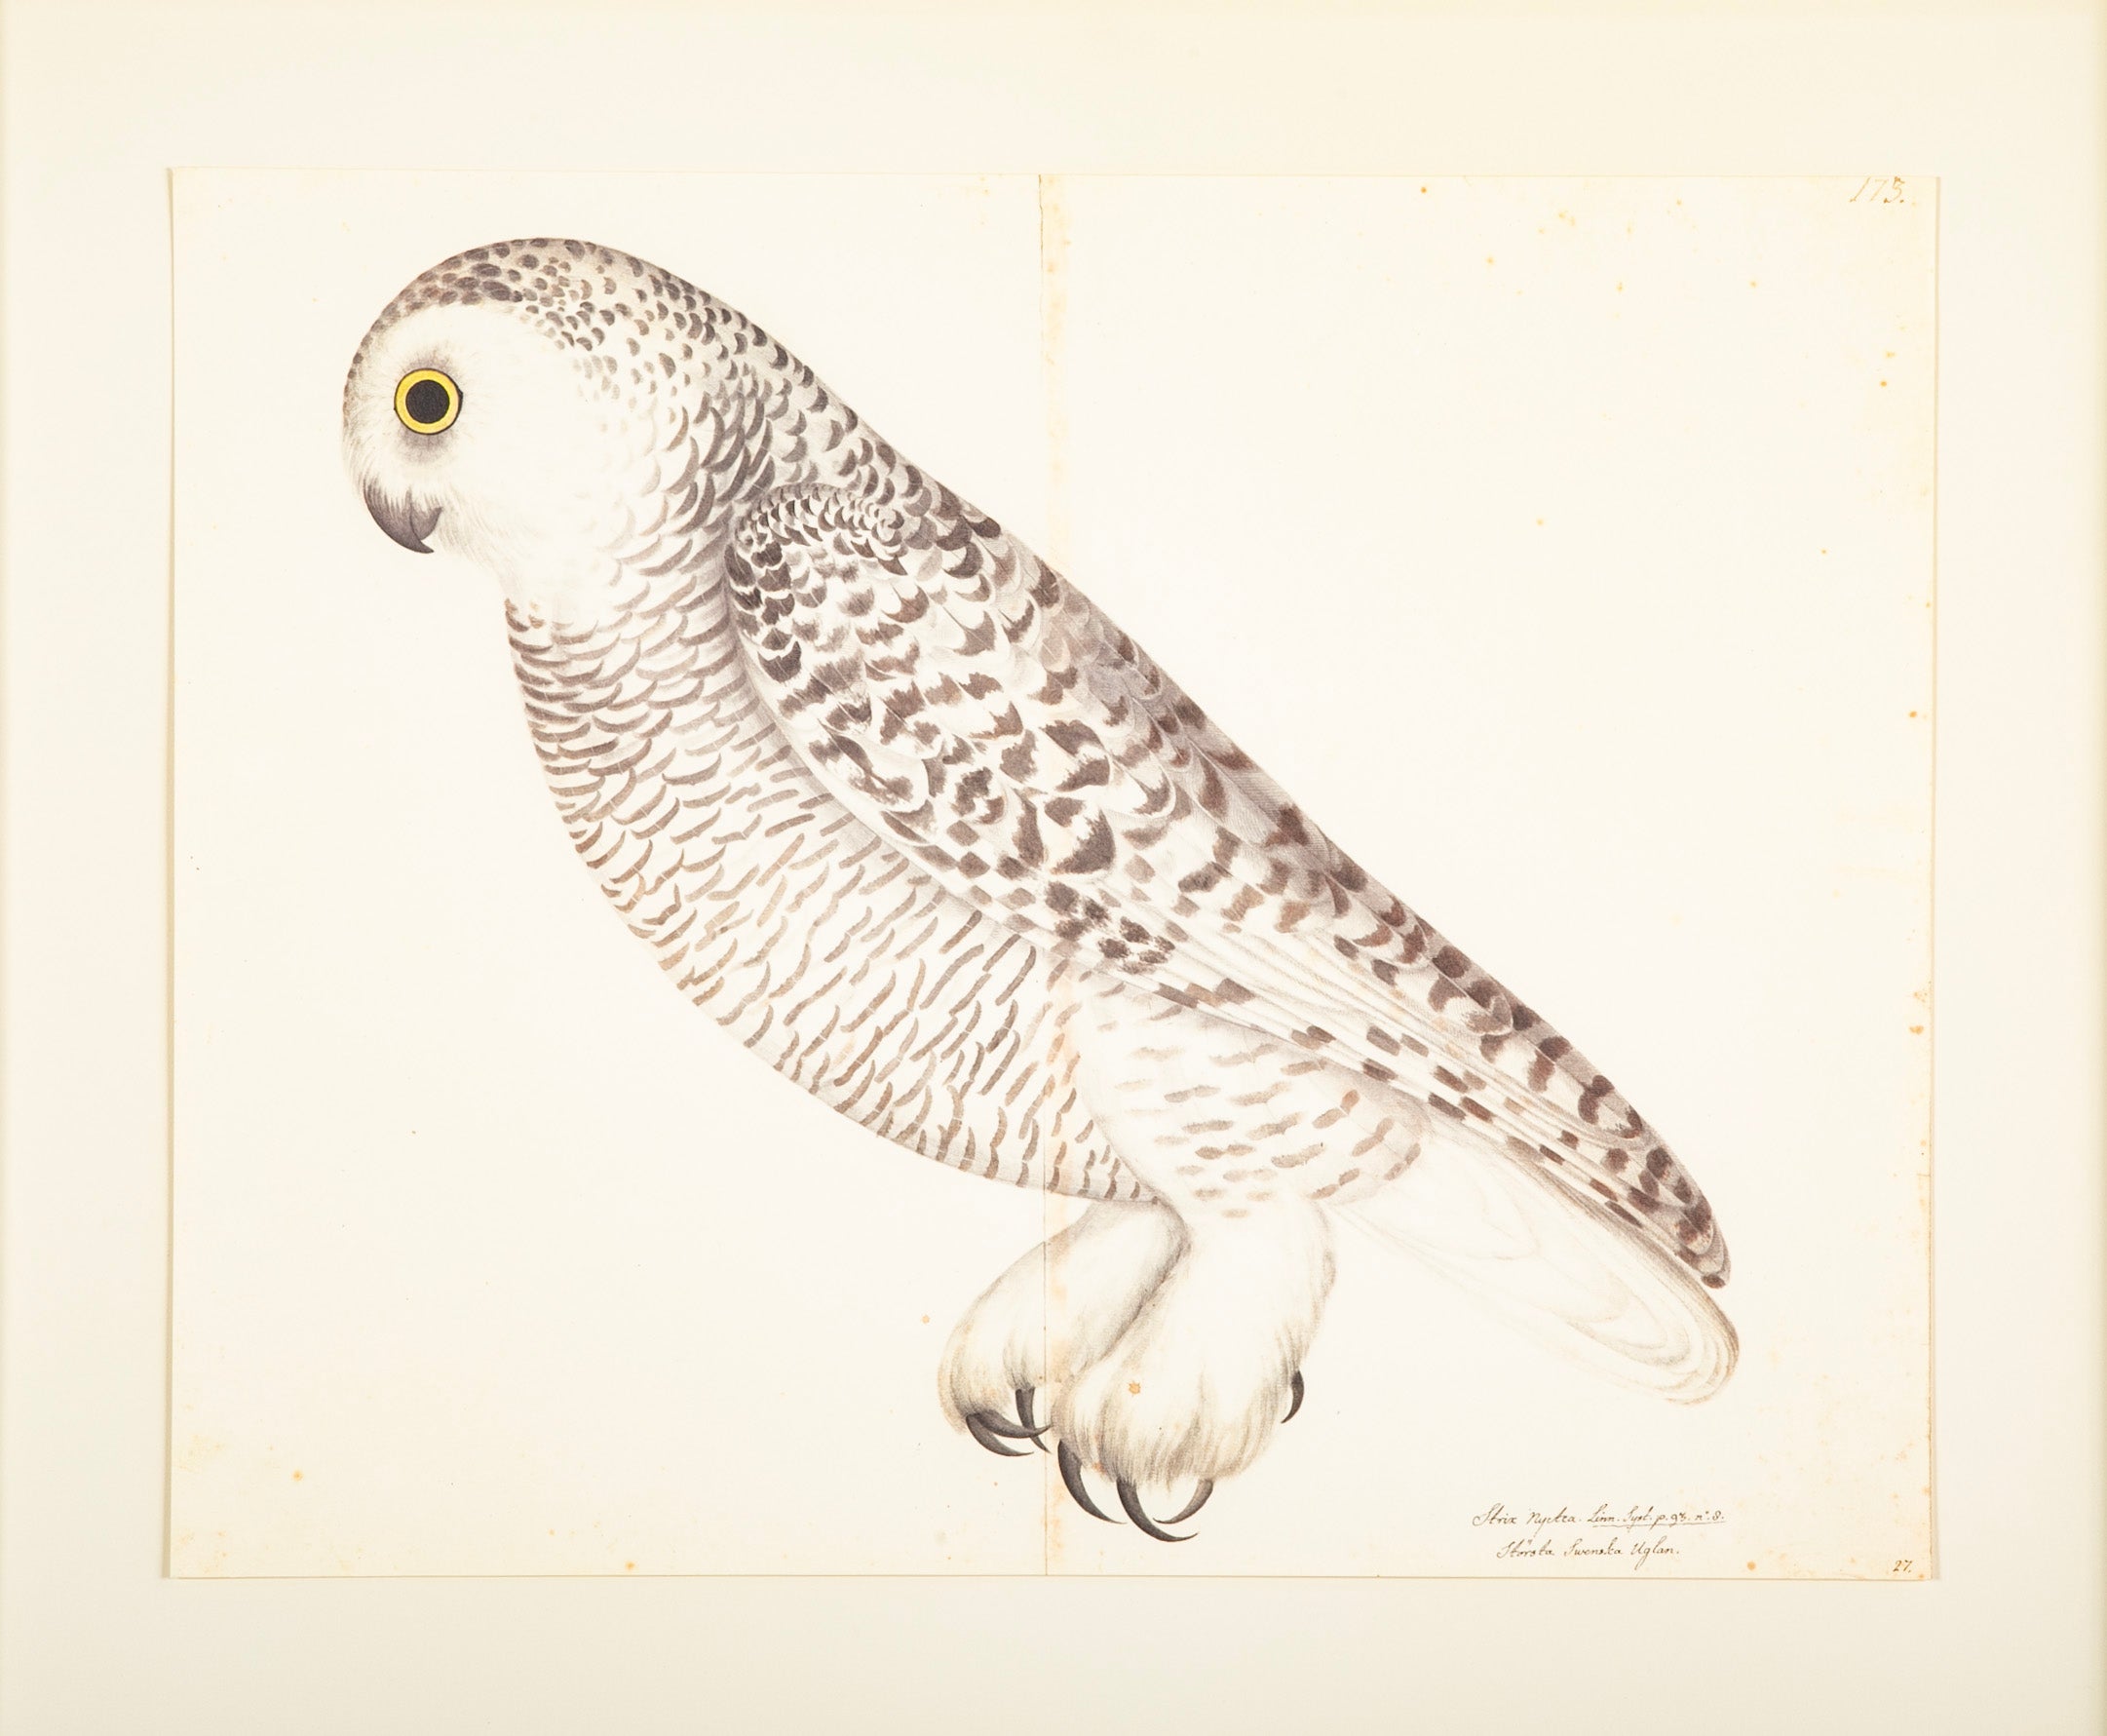 Offset Lithograph of "Snowy Owl, PL 27" from the "The Great Bird Book" by Olof Rudbeck The Younger (1660-1740)